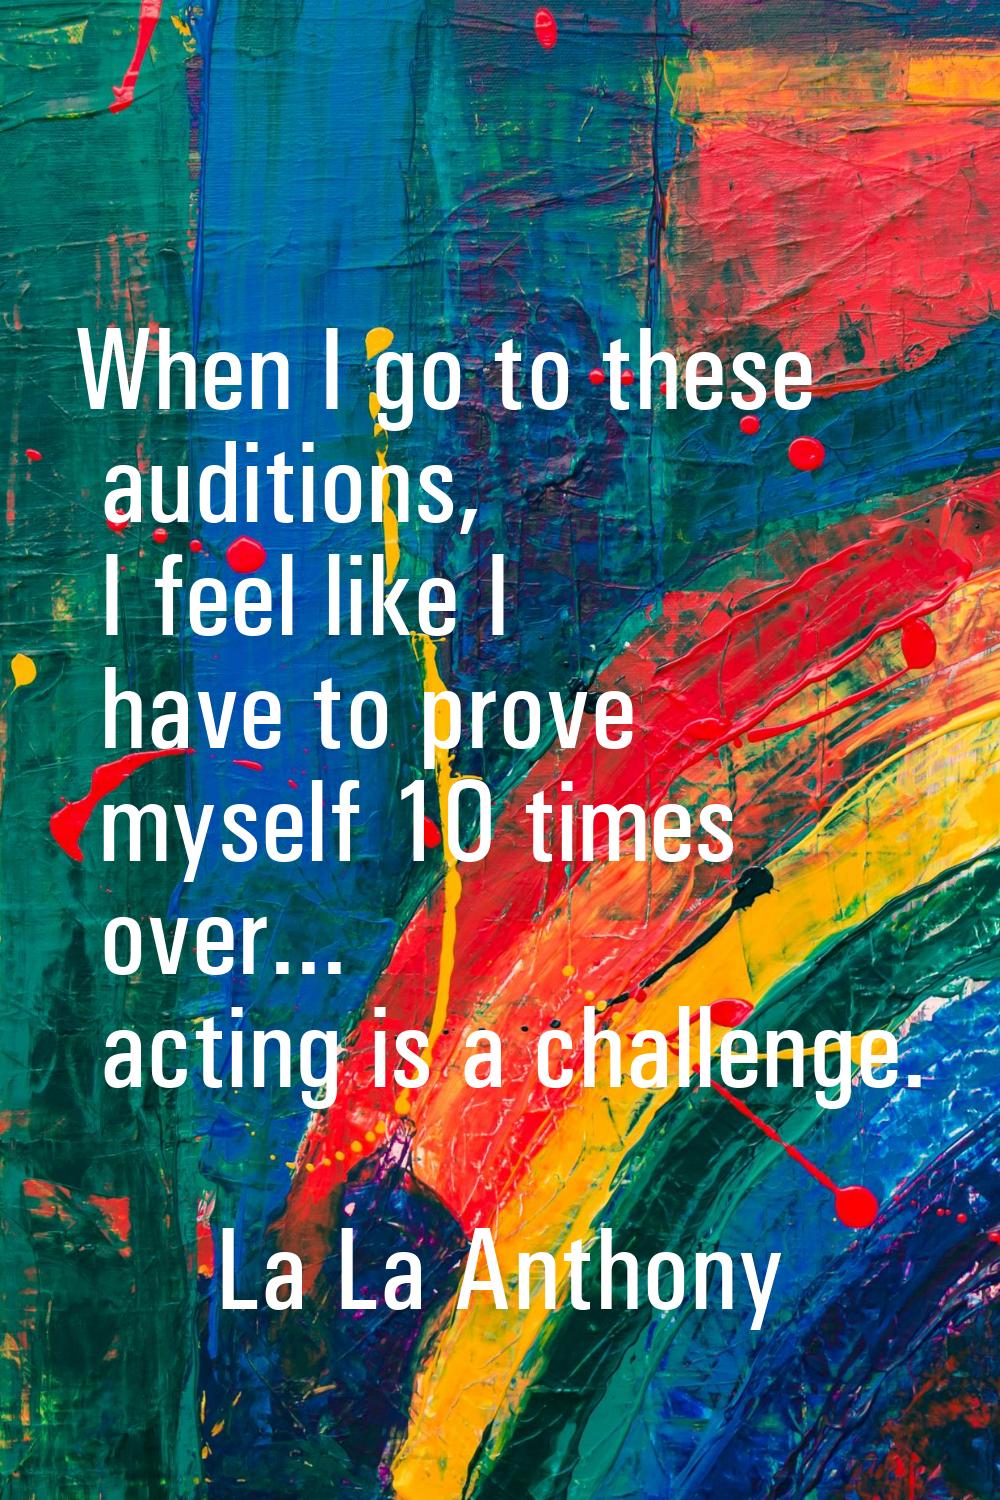 When I go to these auditions, I feel like I have to prove myself 10 times over... acting is a chall